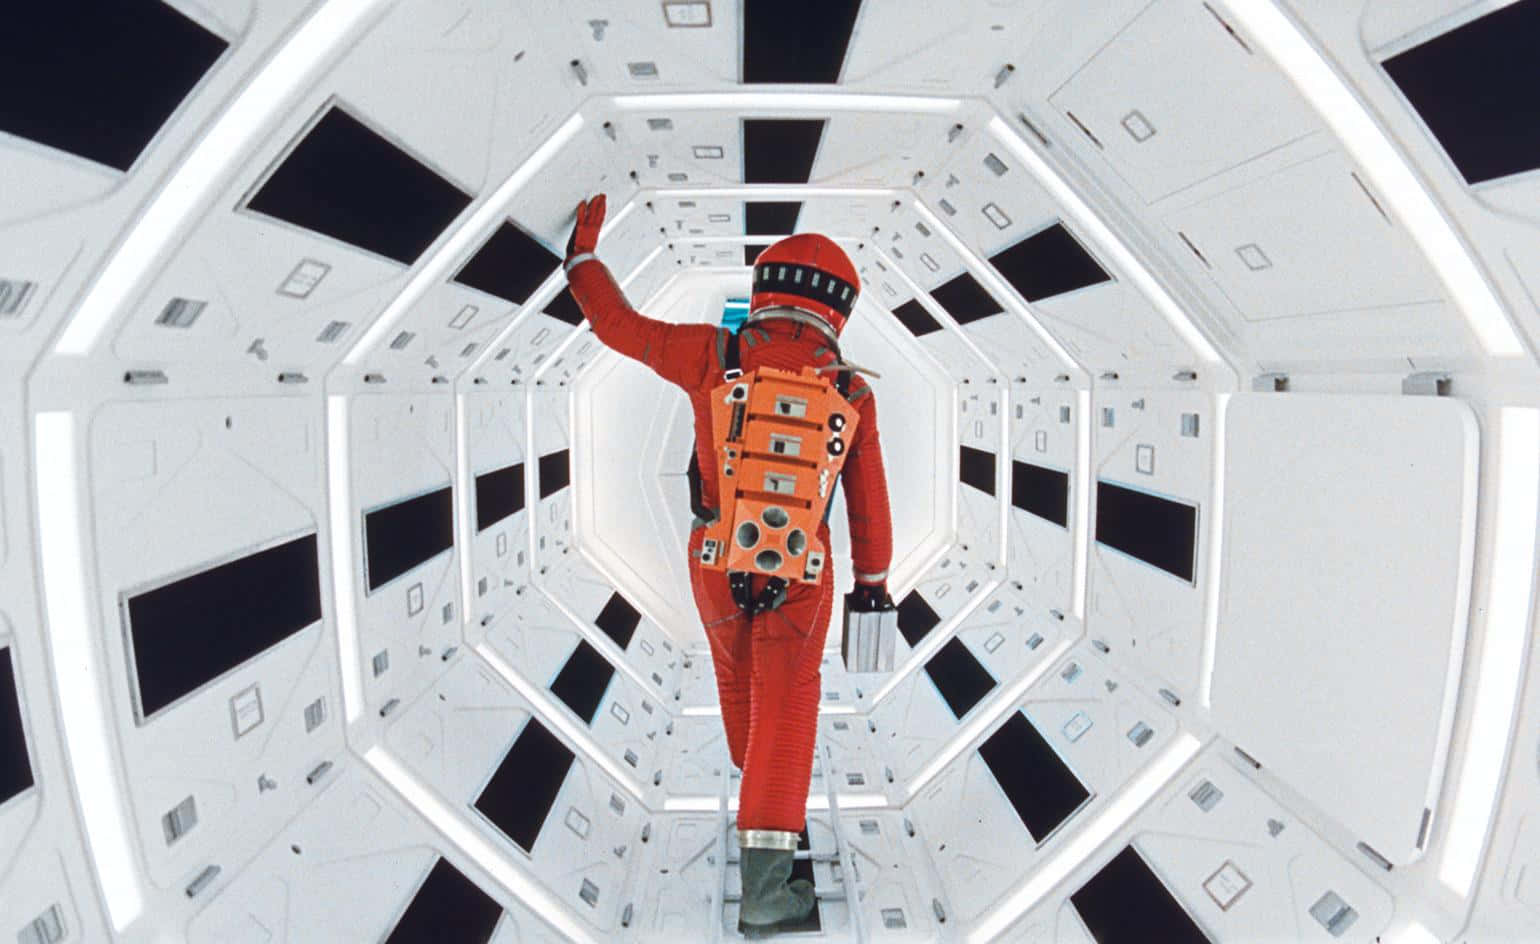 "2001 A Space Odyssey" Wallpaper